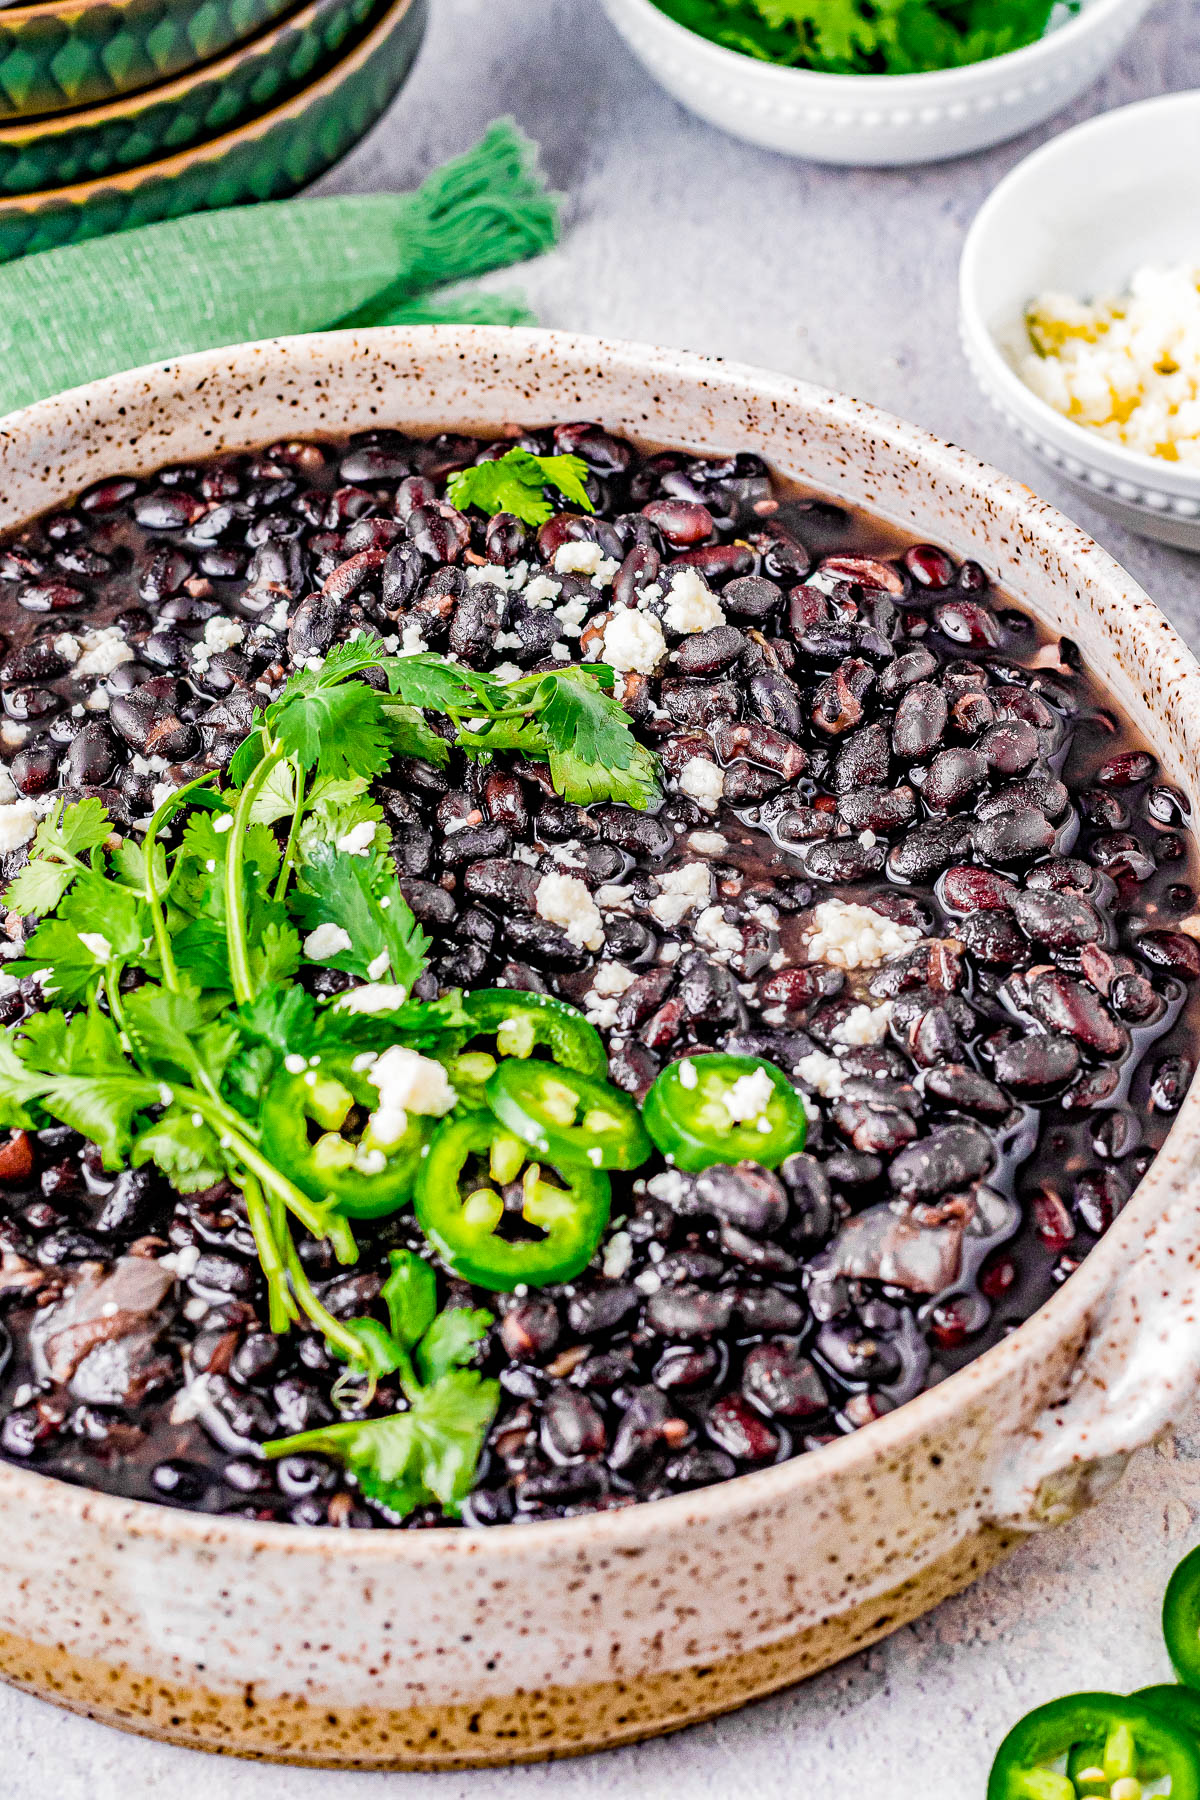 Instant Pot Black Beans – Learn how to EASILY make PERFECT black beans in an Instant Pot in just ONE hour! Substitute these superior tasting homemade black beans in any recipe that calls for canned black beans including soups, chili, casseroles, burritos, tacos, or your favorite Mexican recipes!